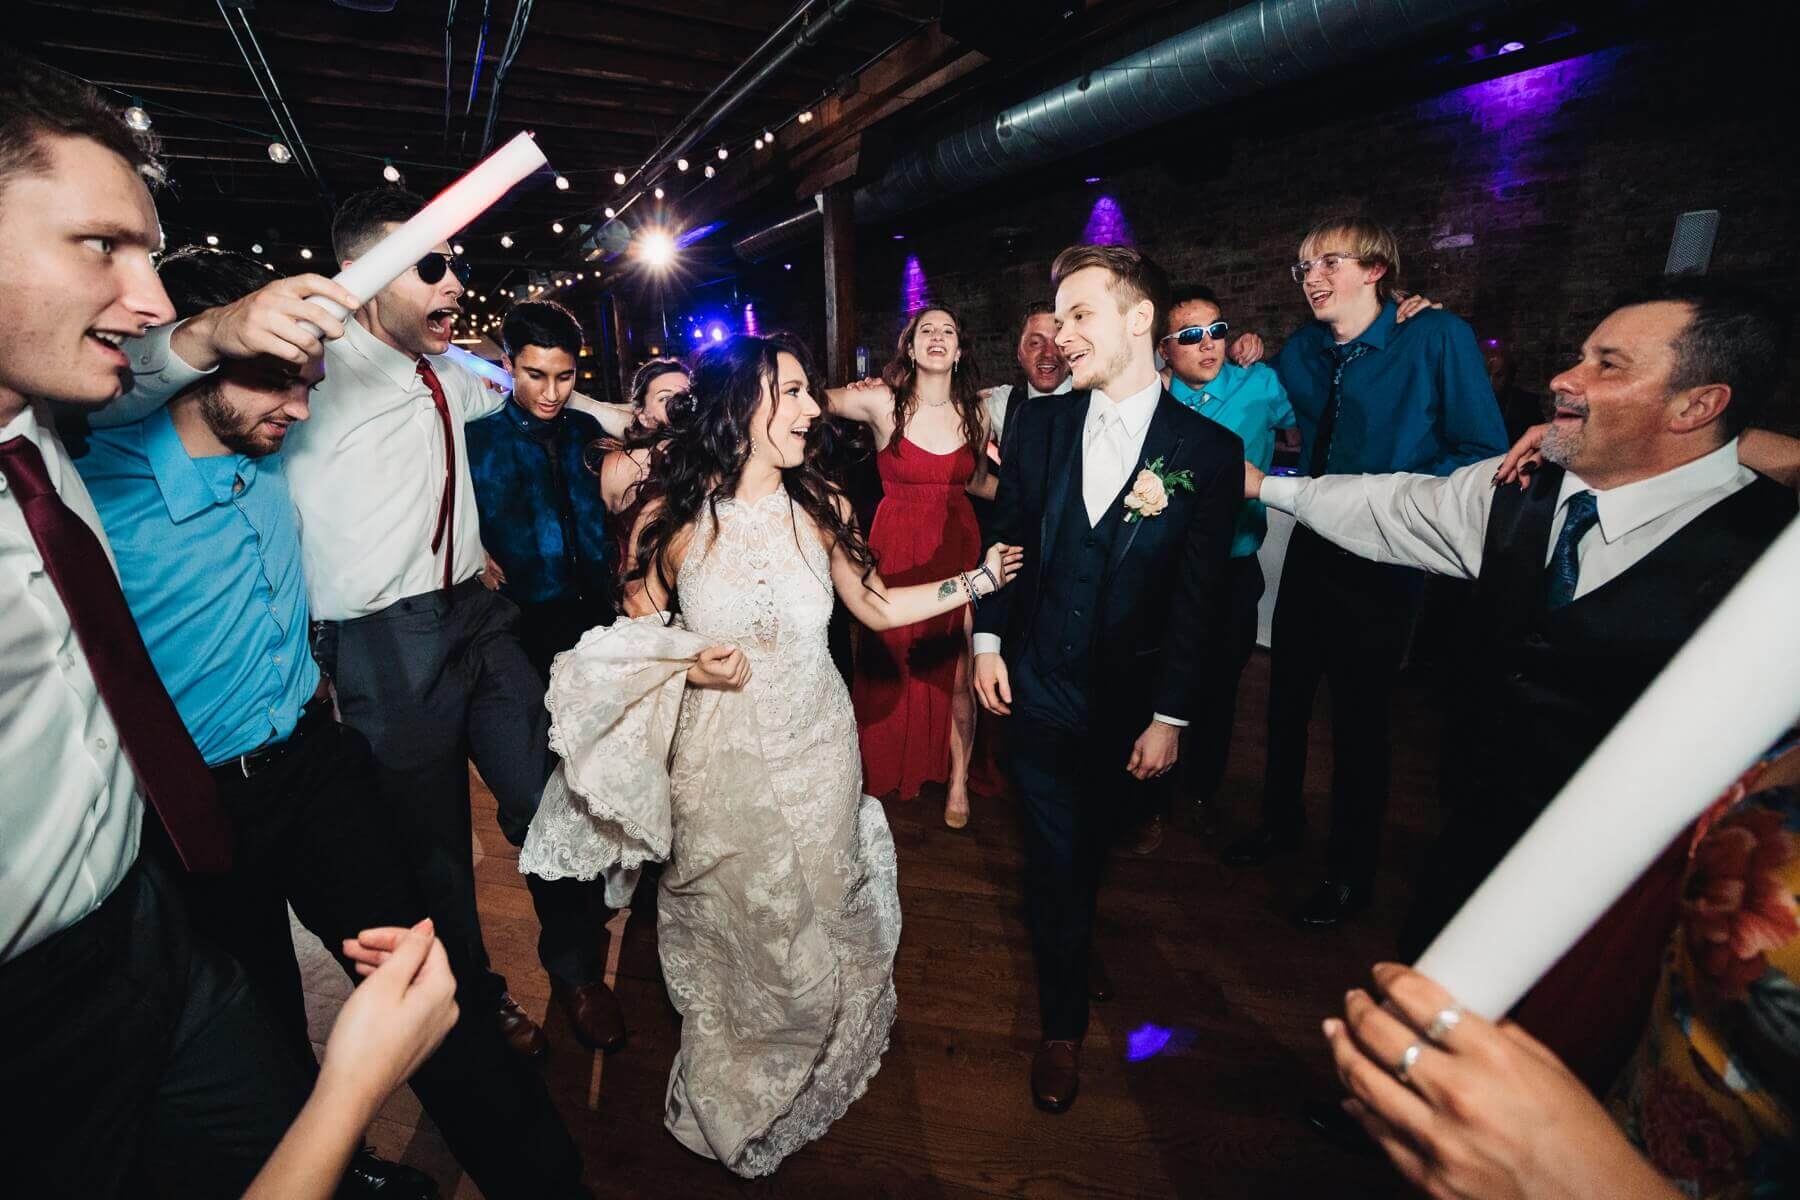 Bride and groom dancing with wedding guests at wedding venue in Illinois